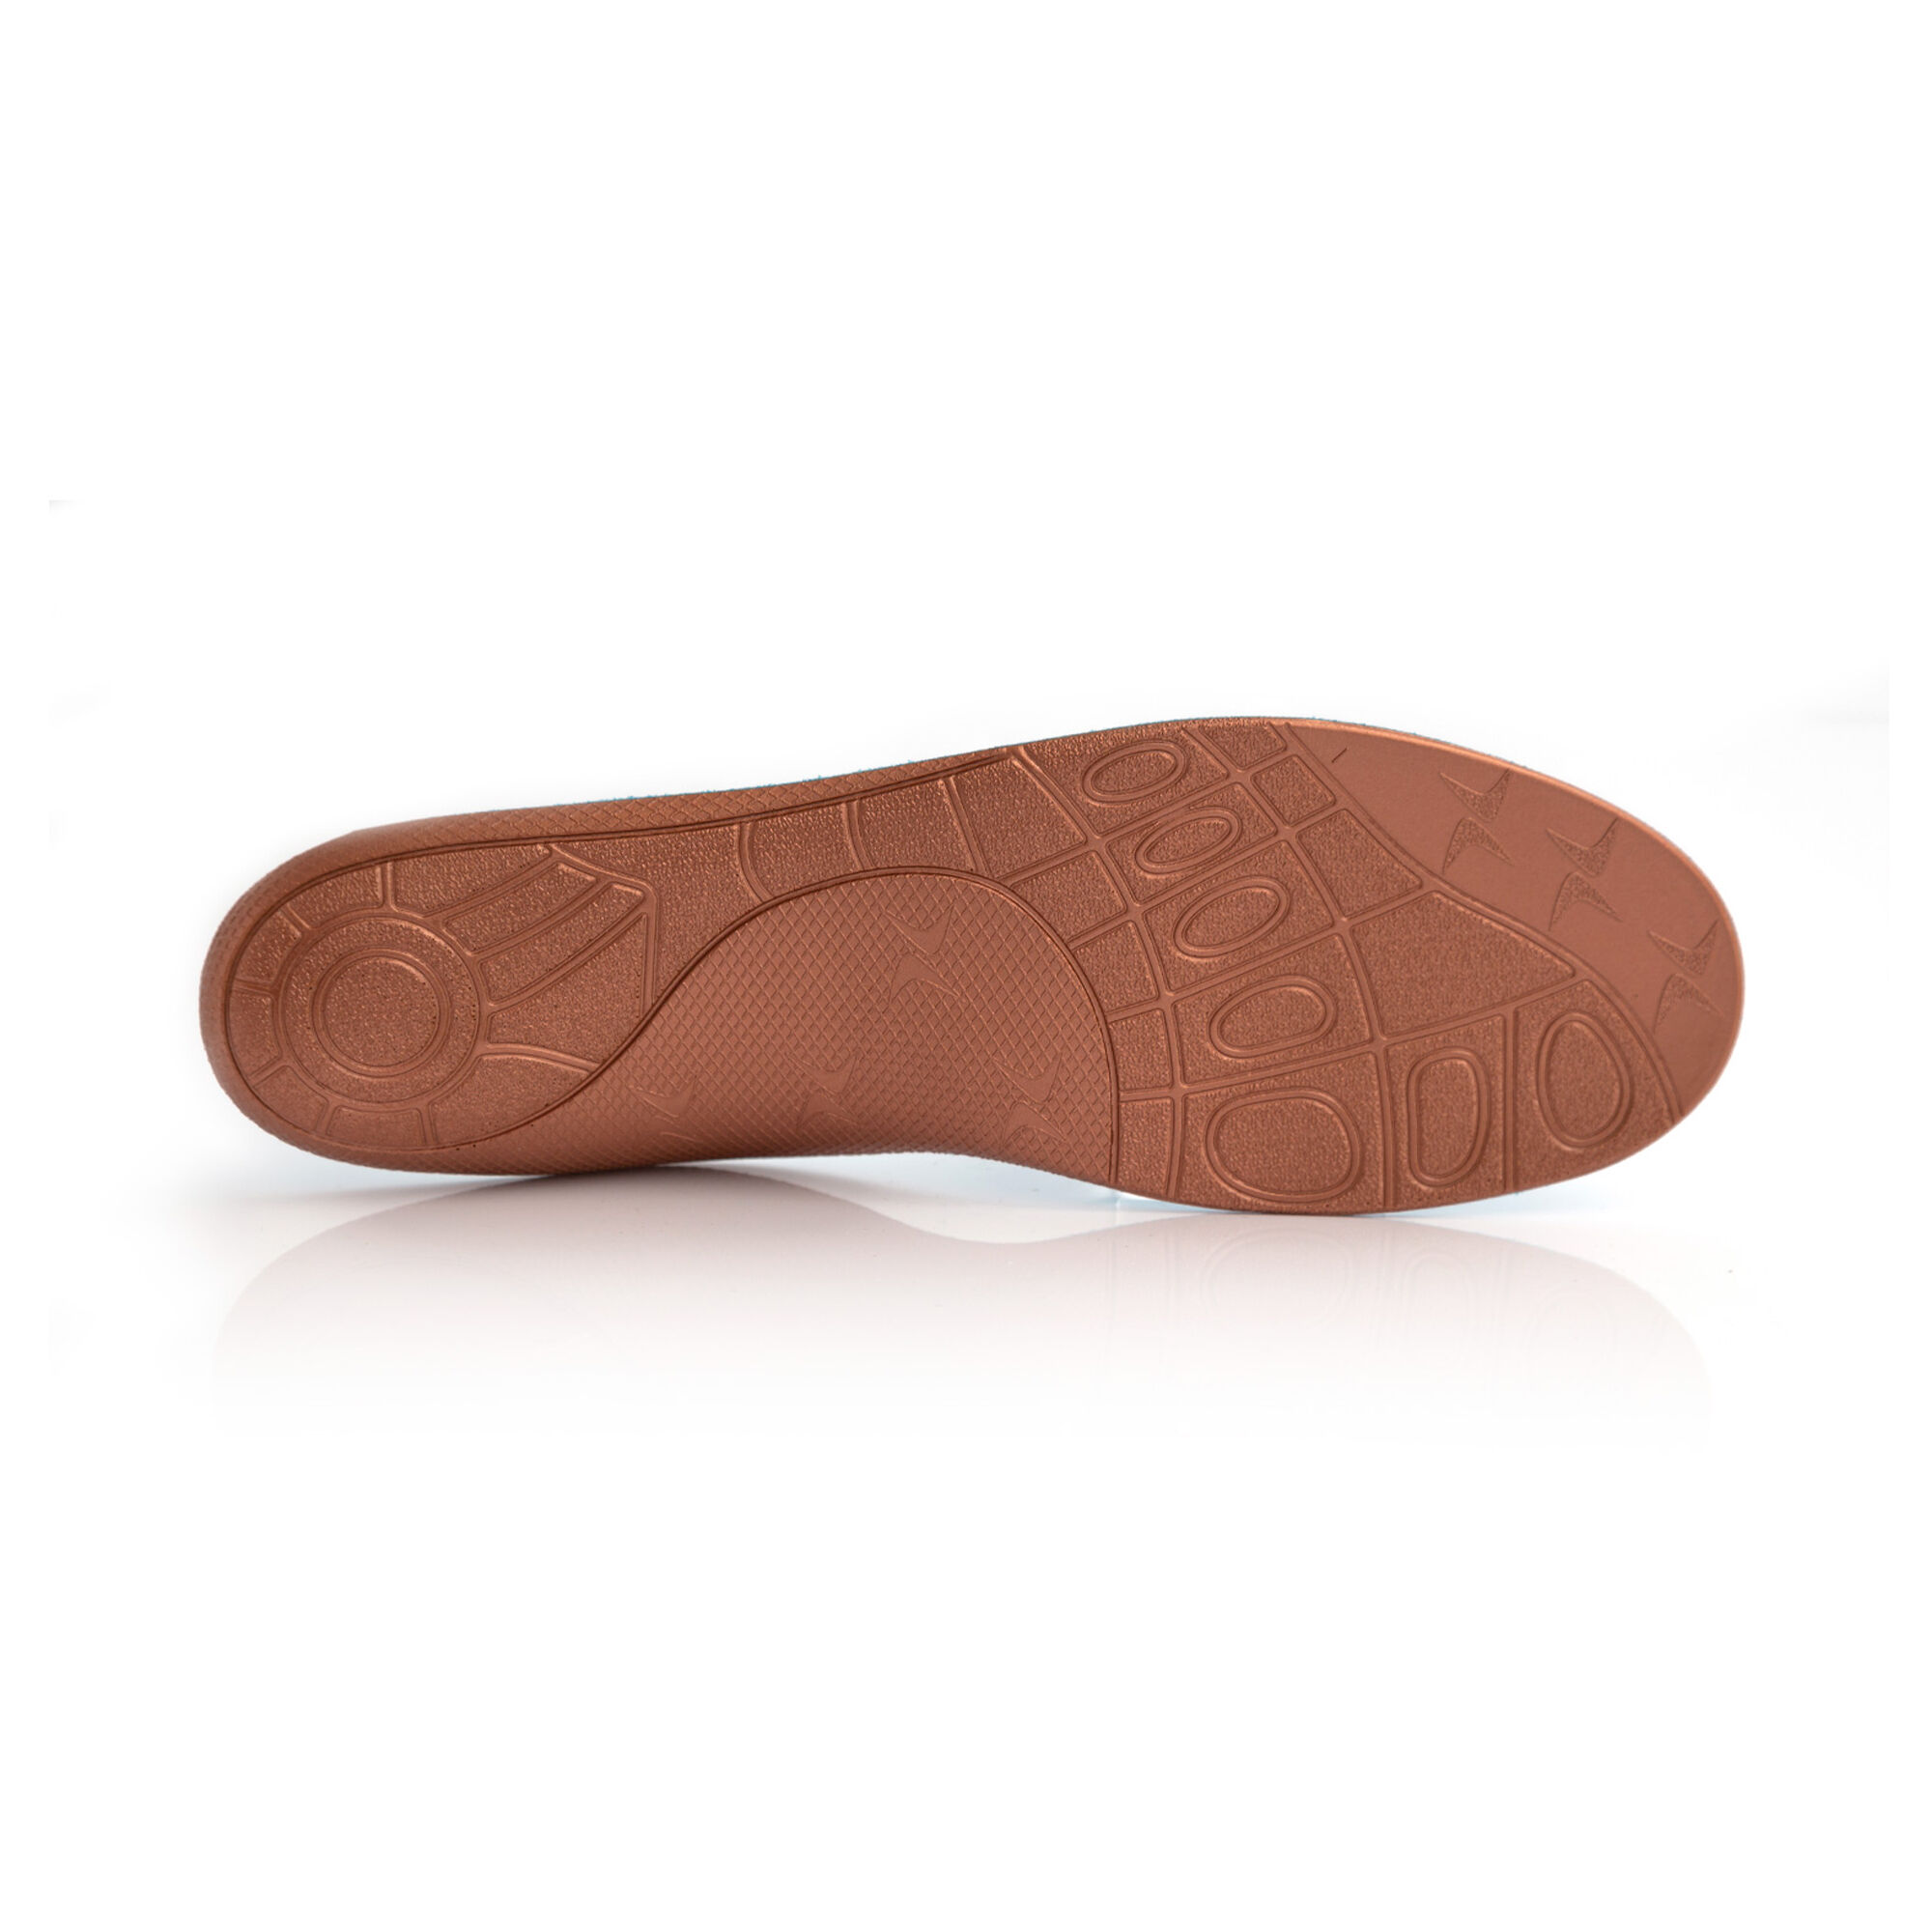 women's boots with removable insoles for orthotics